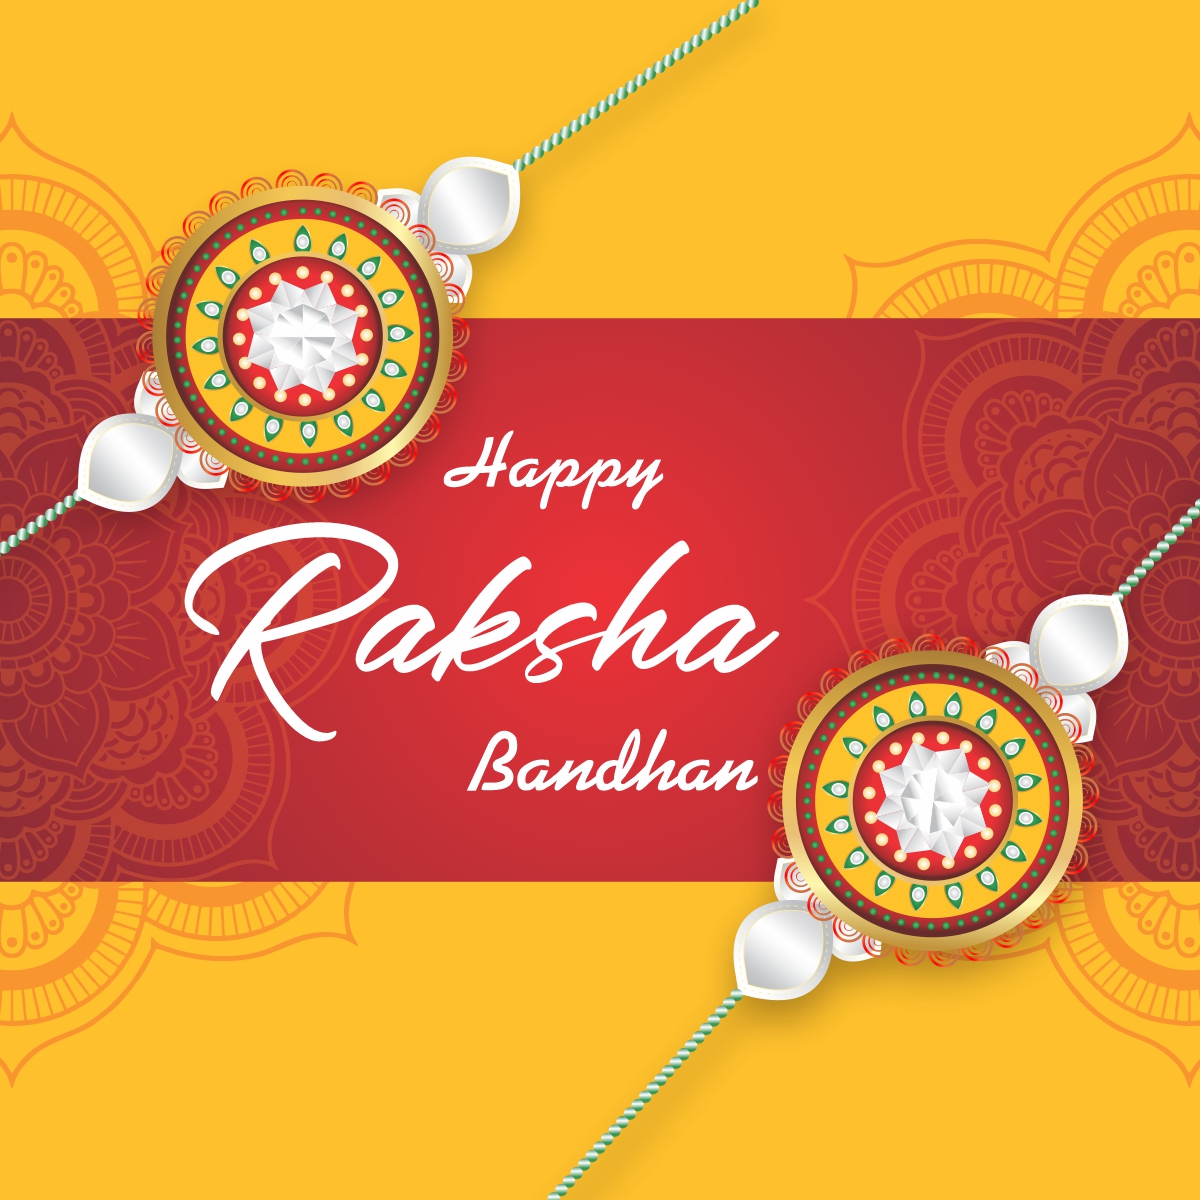 Incredible Collection Download Over 999+ Beautiful Rakhi Images in